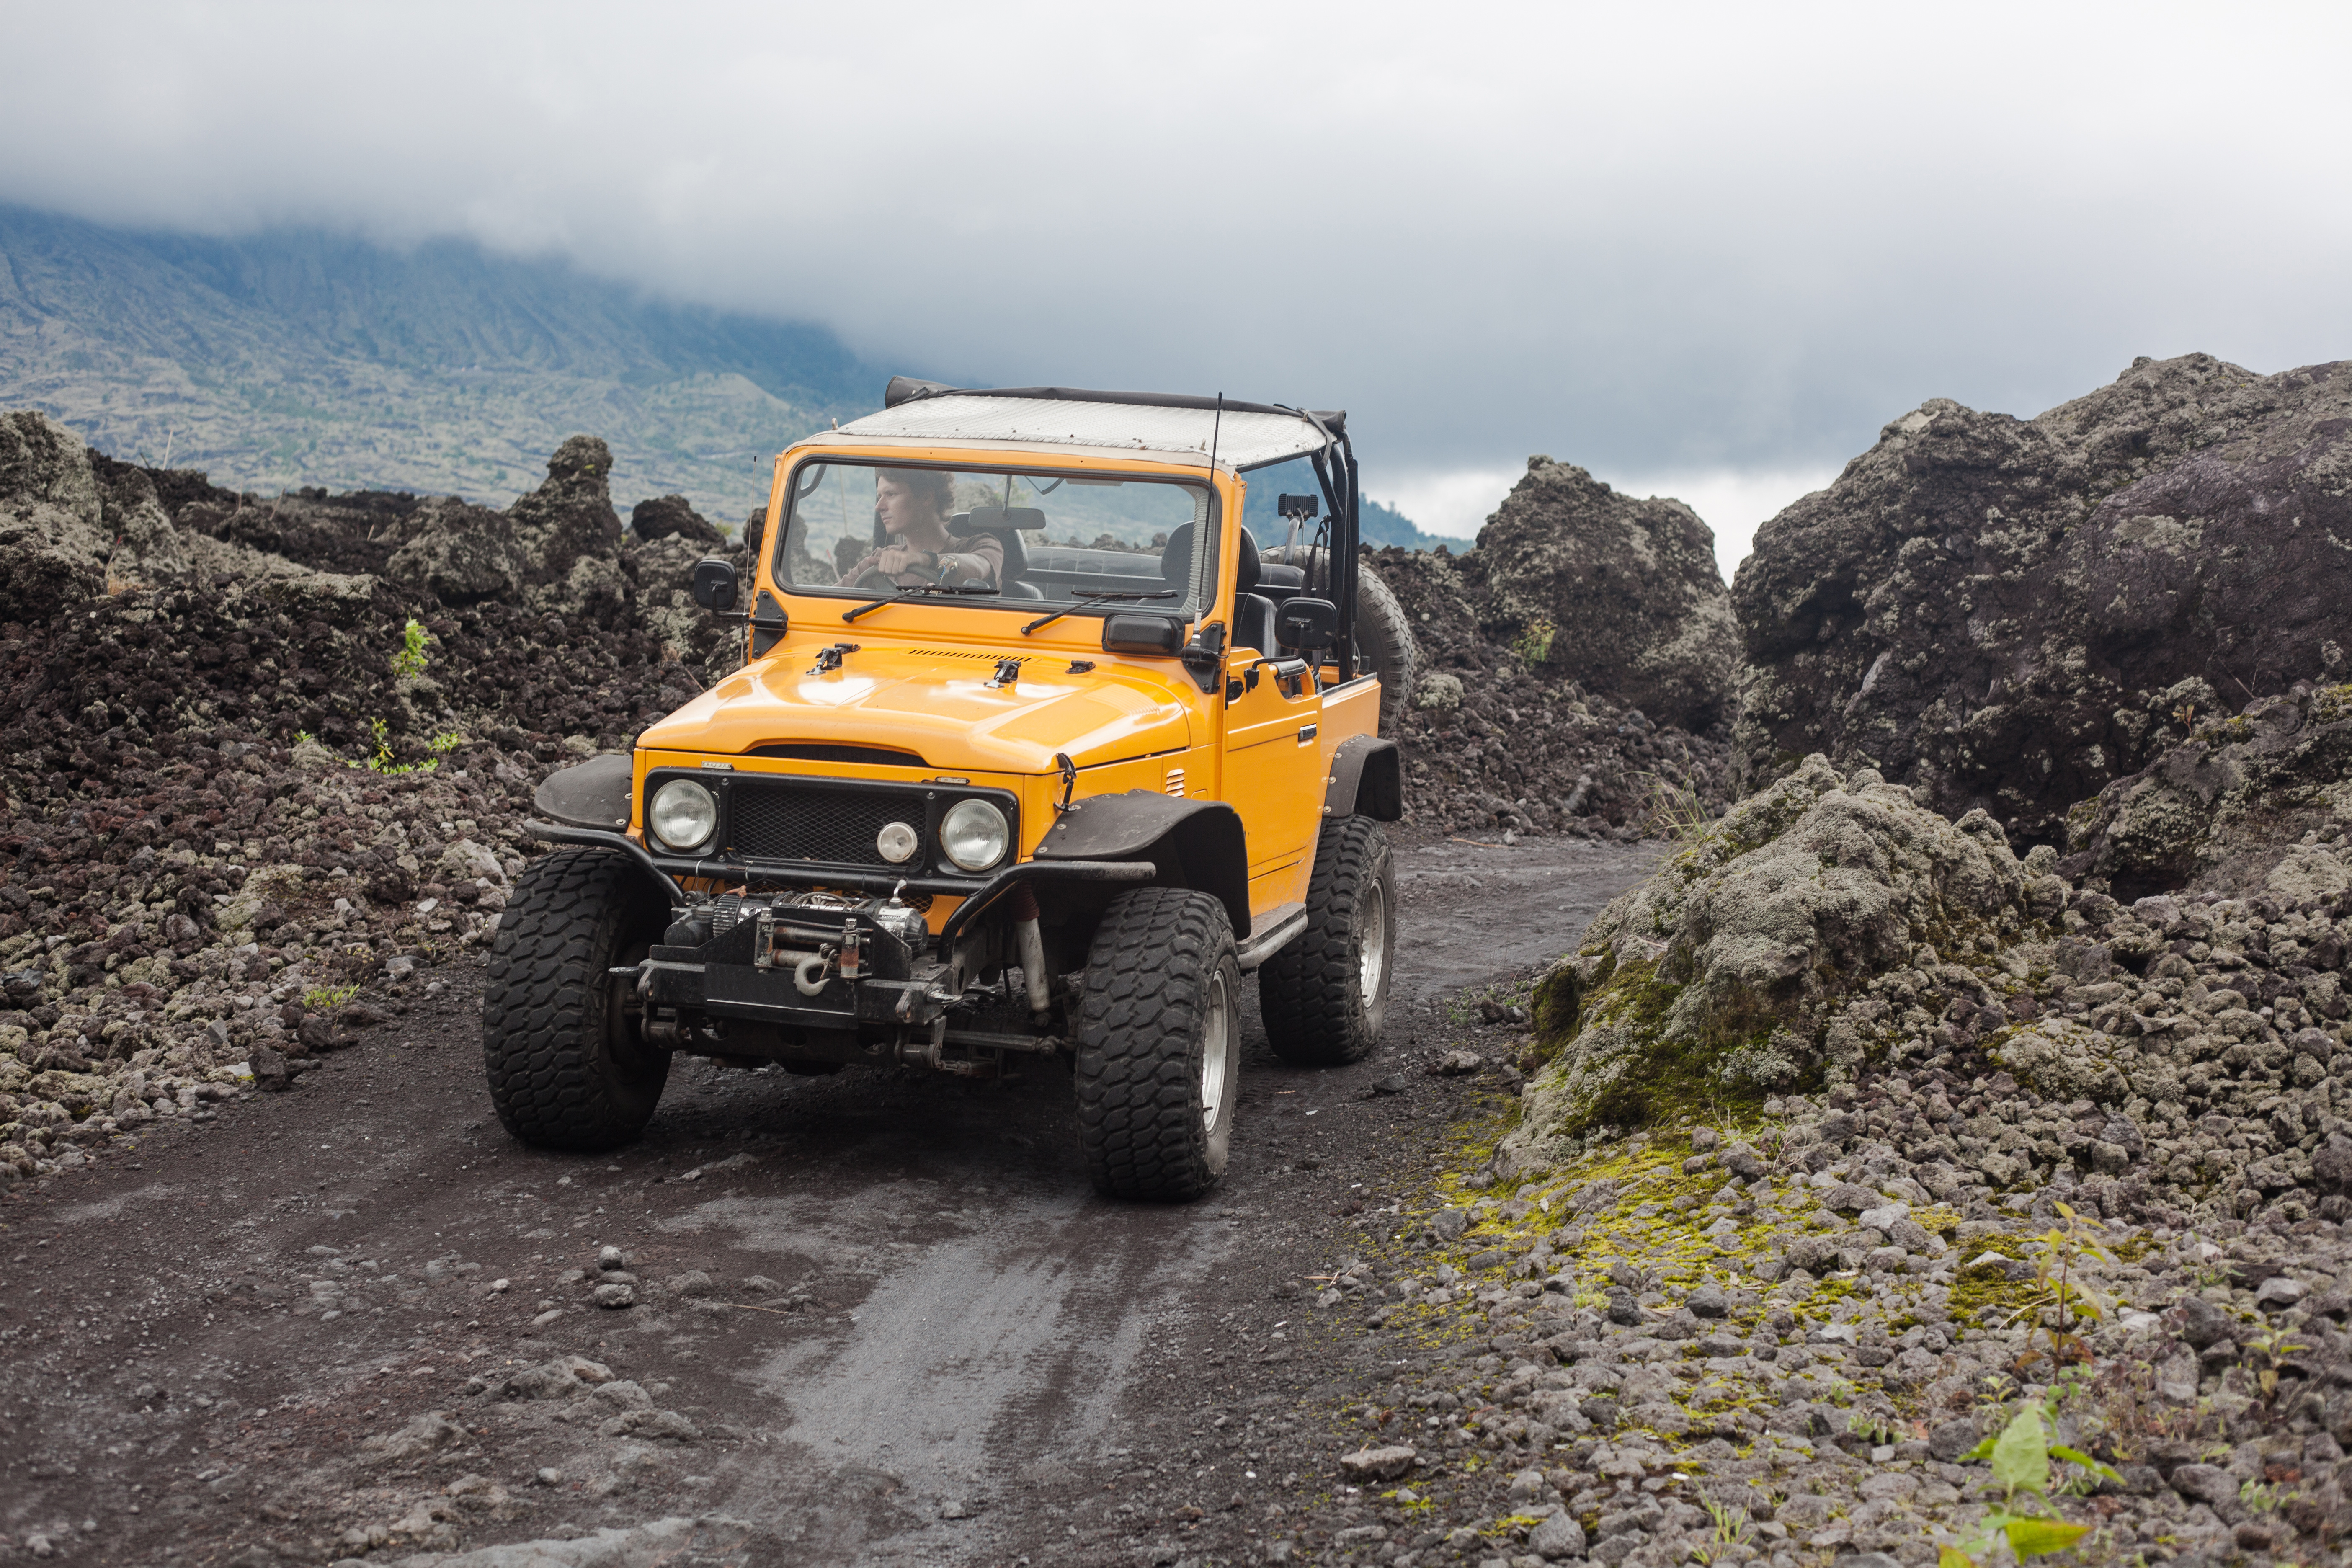 Off Roader by Nature 8 Best Off Road Vehicles to Buy in 2019 Motor Era